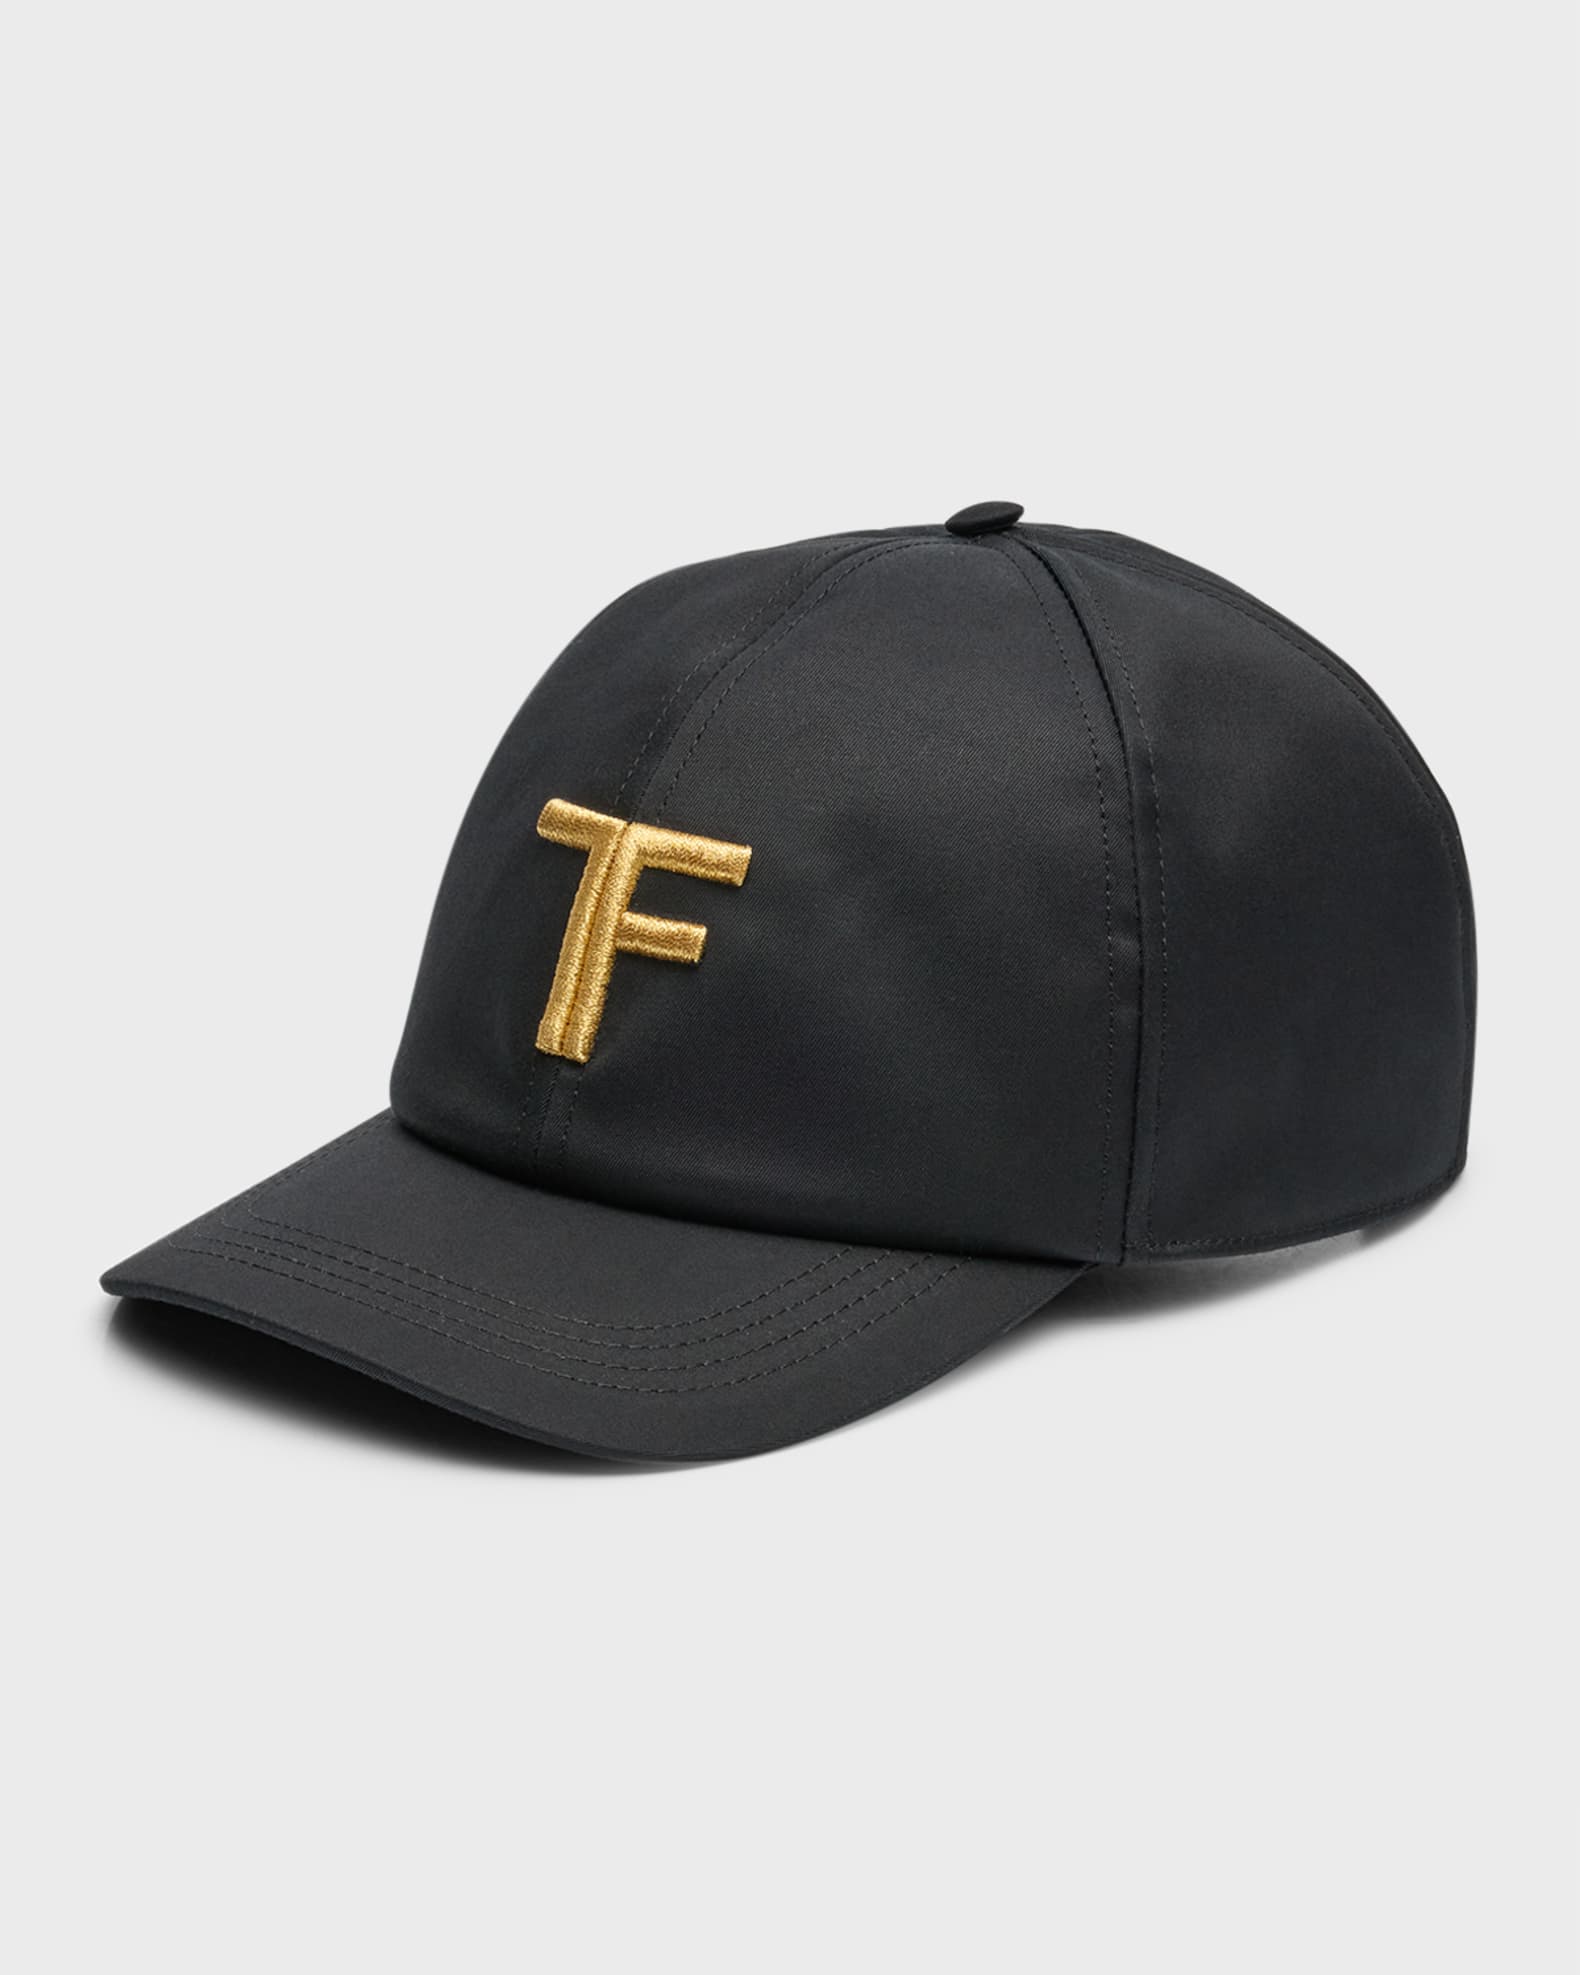 TOM FORD Men's Embroidered TF Baseball Cap | Neiman Marcus